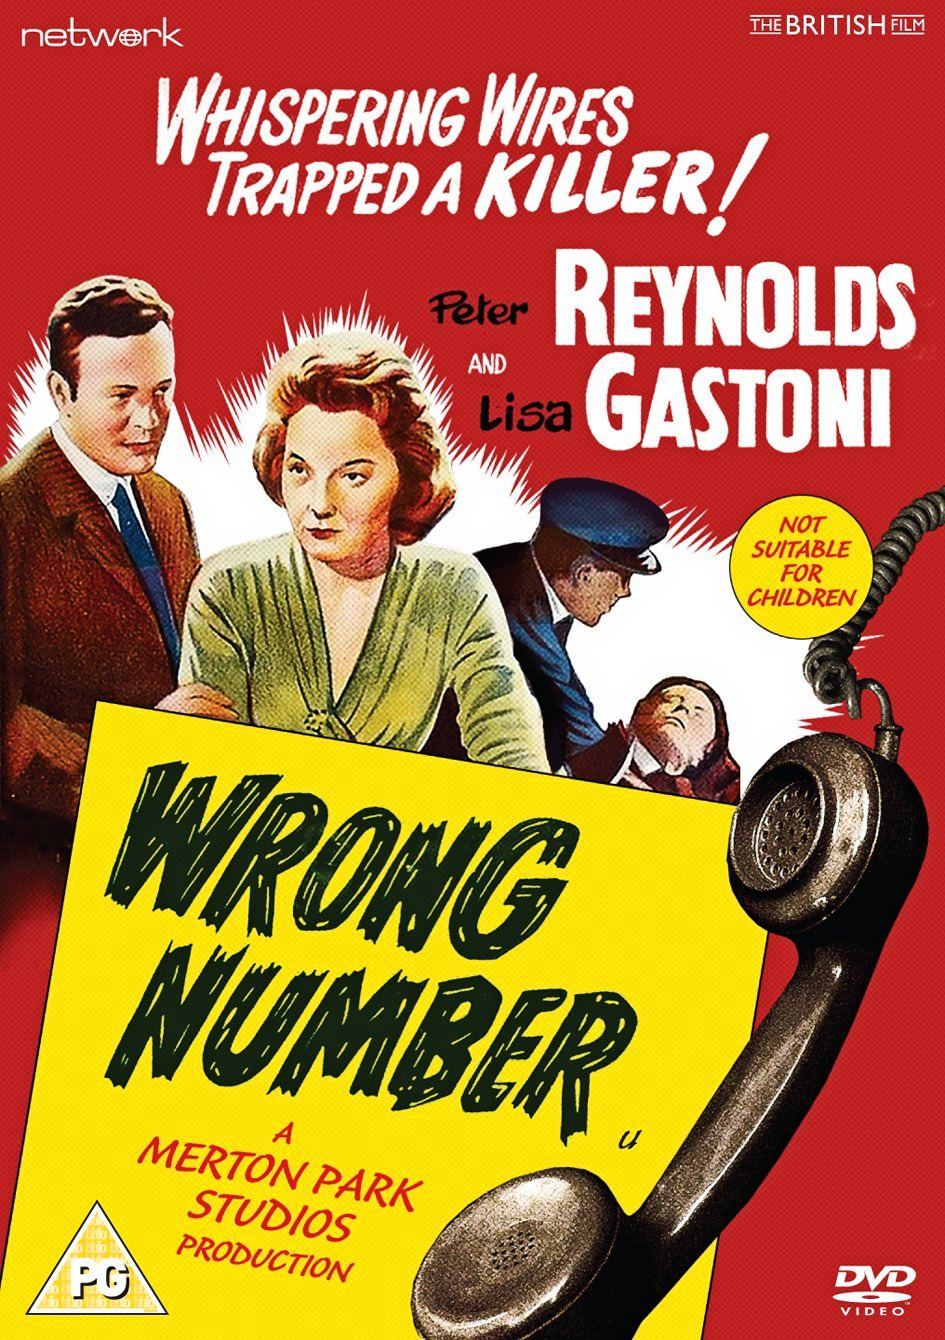 Wrong Number DVD from Network and the British Film